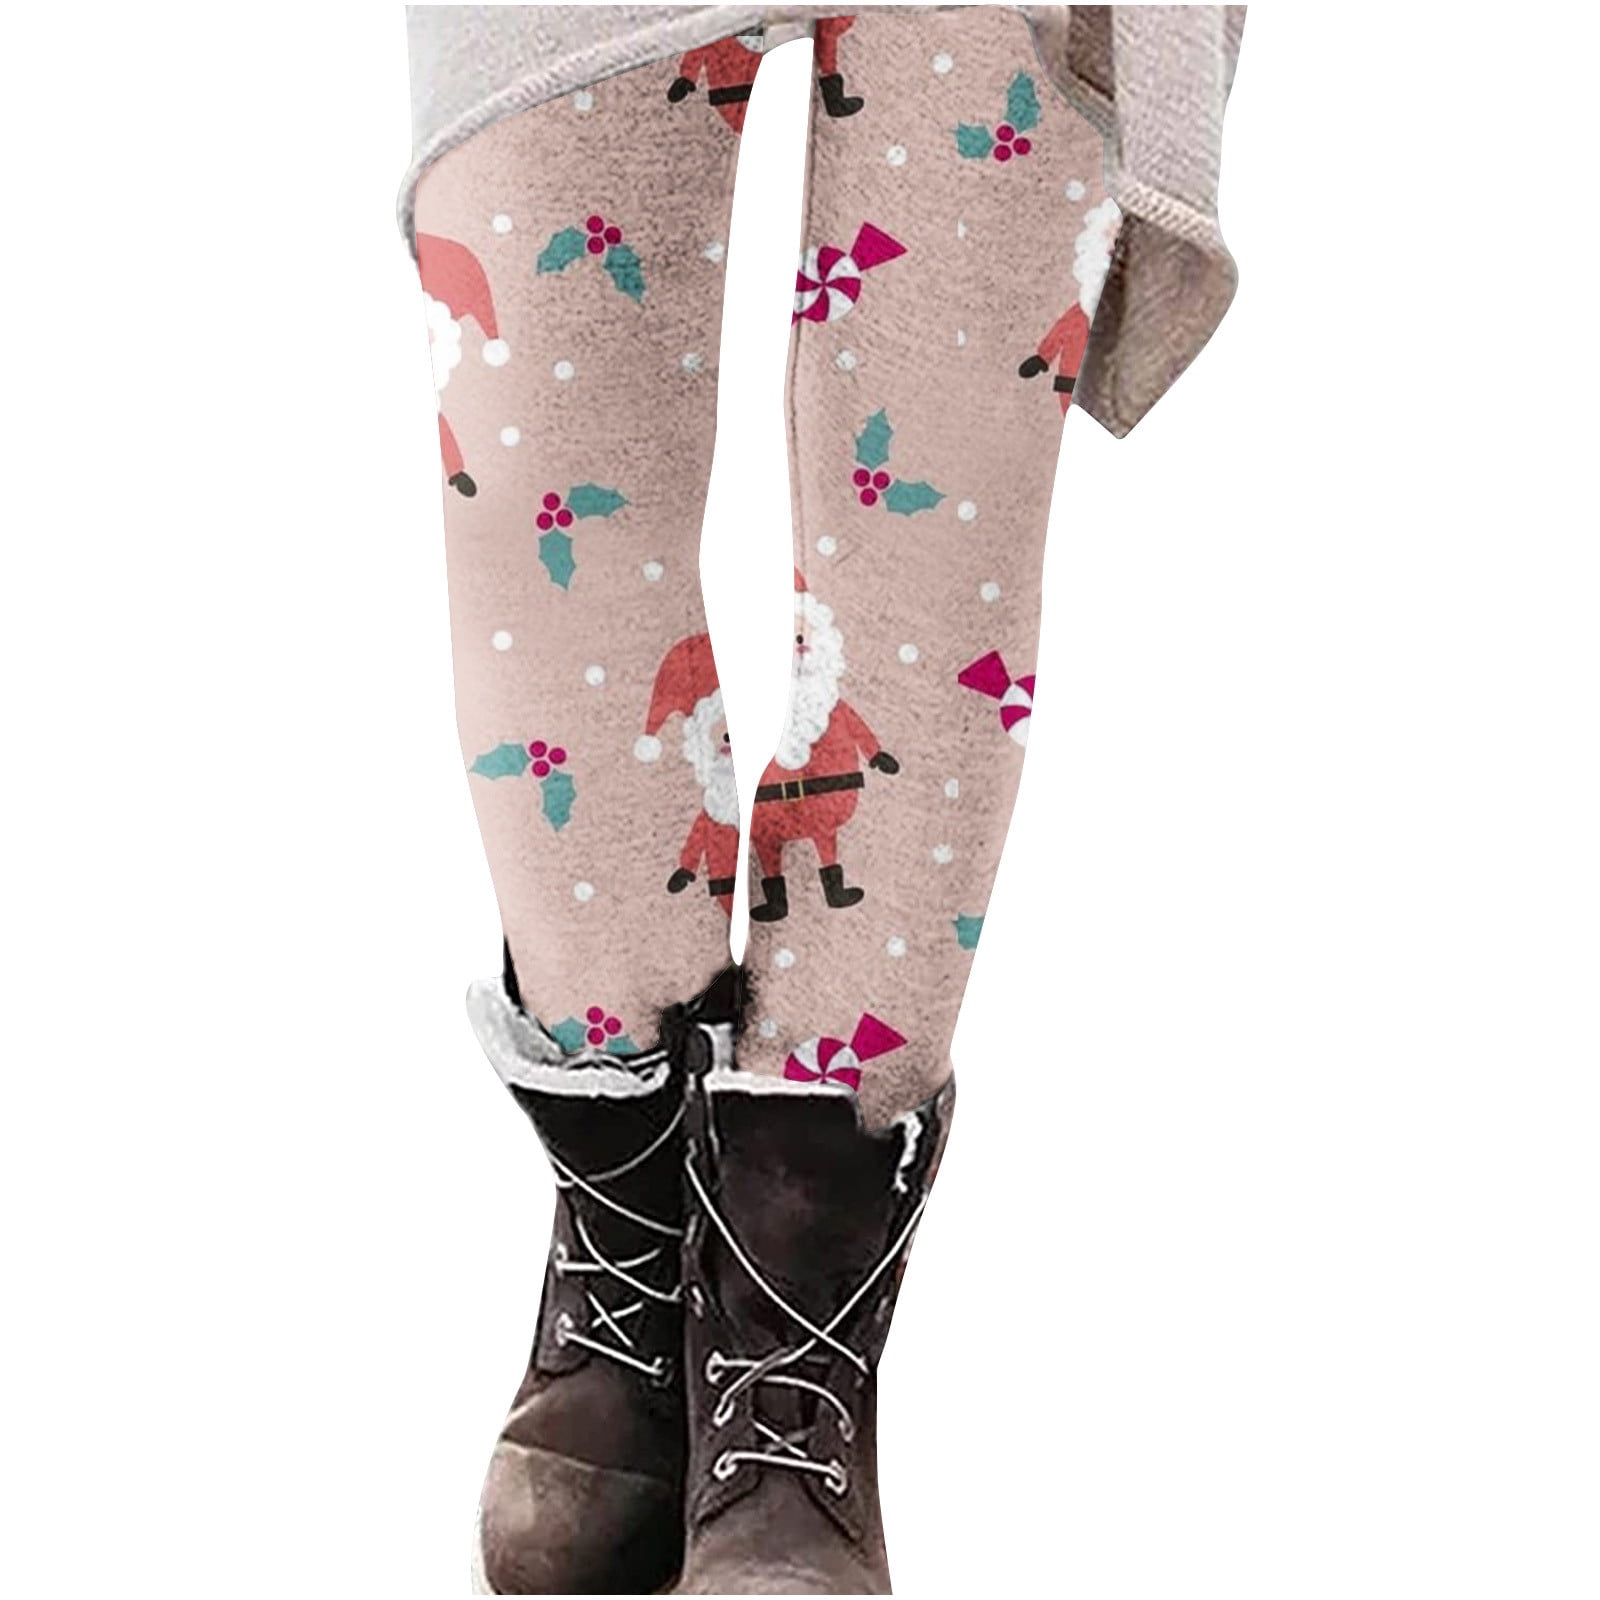 Xihbxyly Fuzzy Leggings for Women Women's Autumn And Winter Fashion  Christmas Print Slim Boots Trousers Women's Leggings Fleece Lined Leggings  Soft